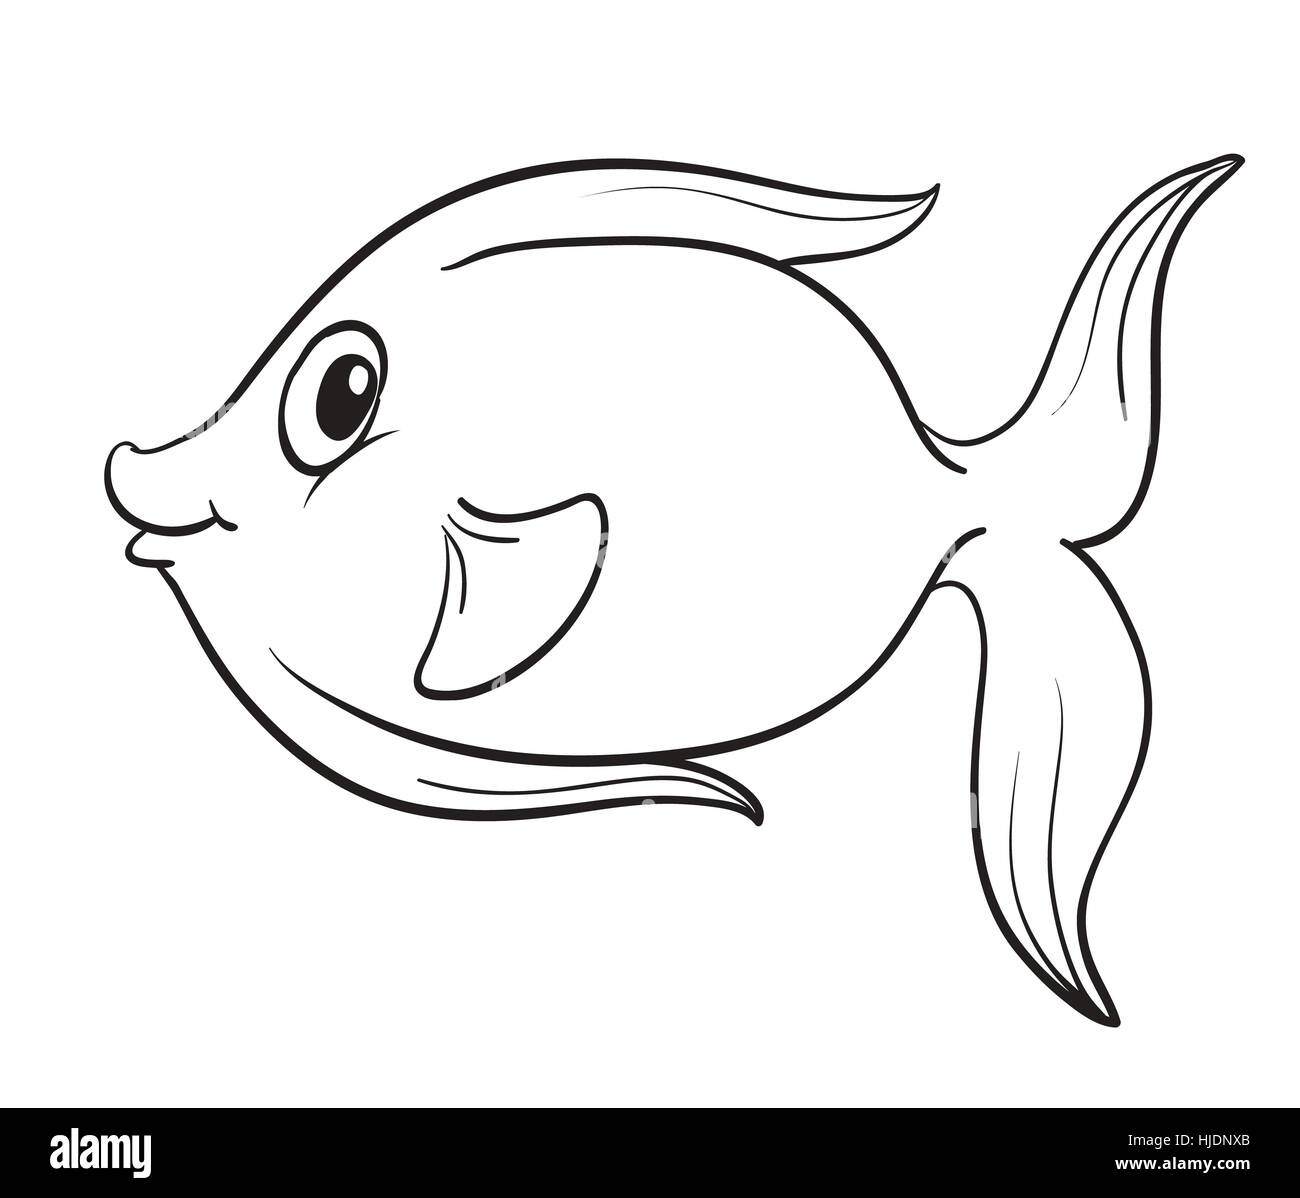 detailed illustration of a fish outline Stock Photo - Alamy